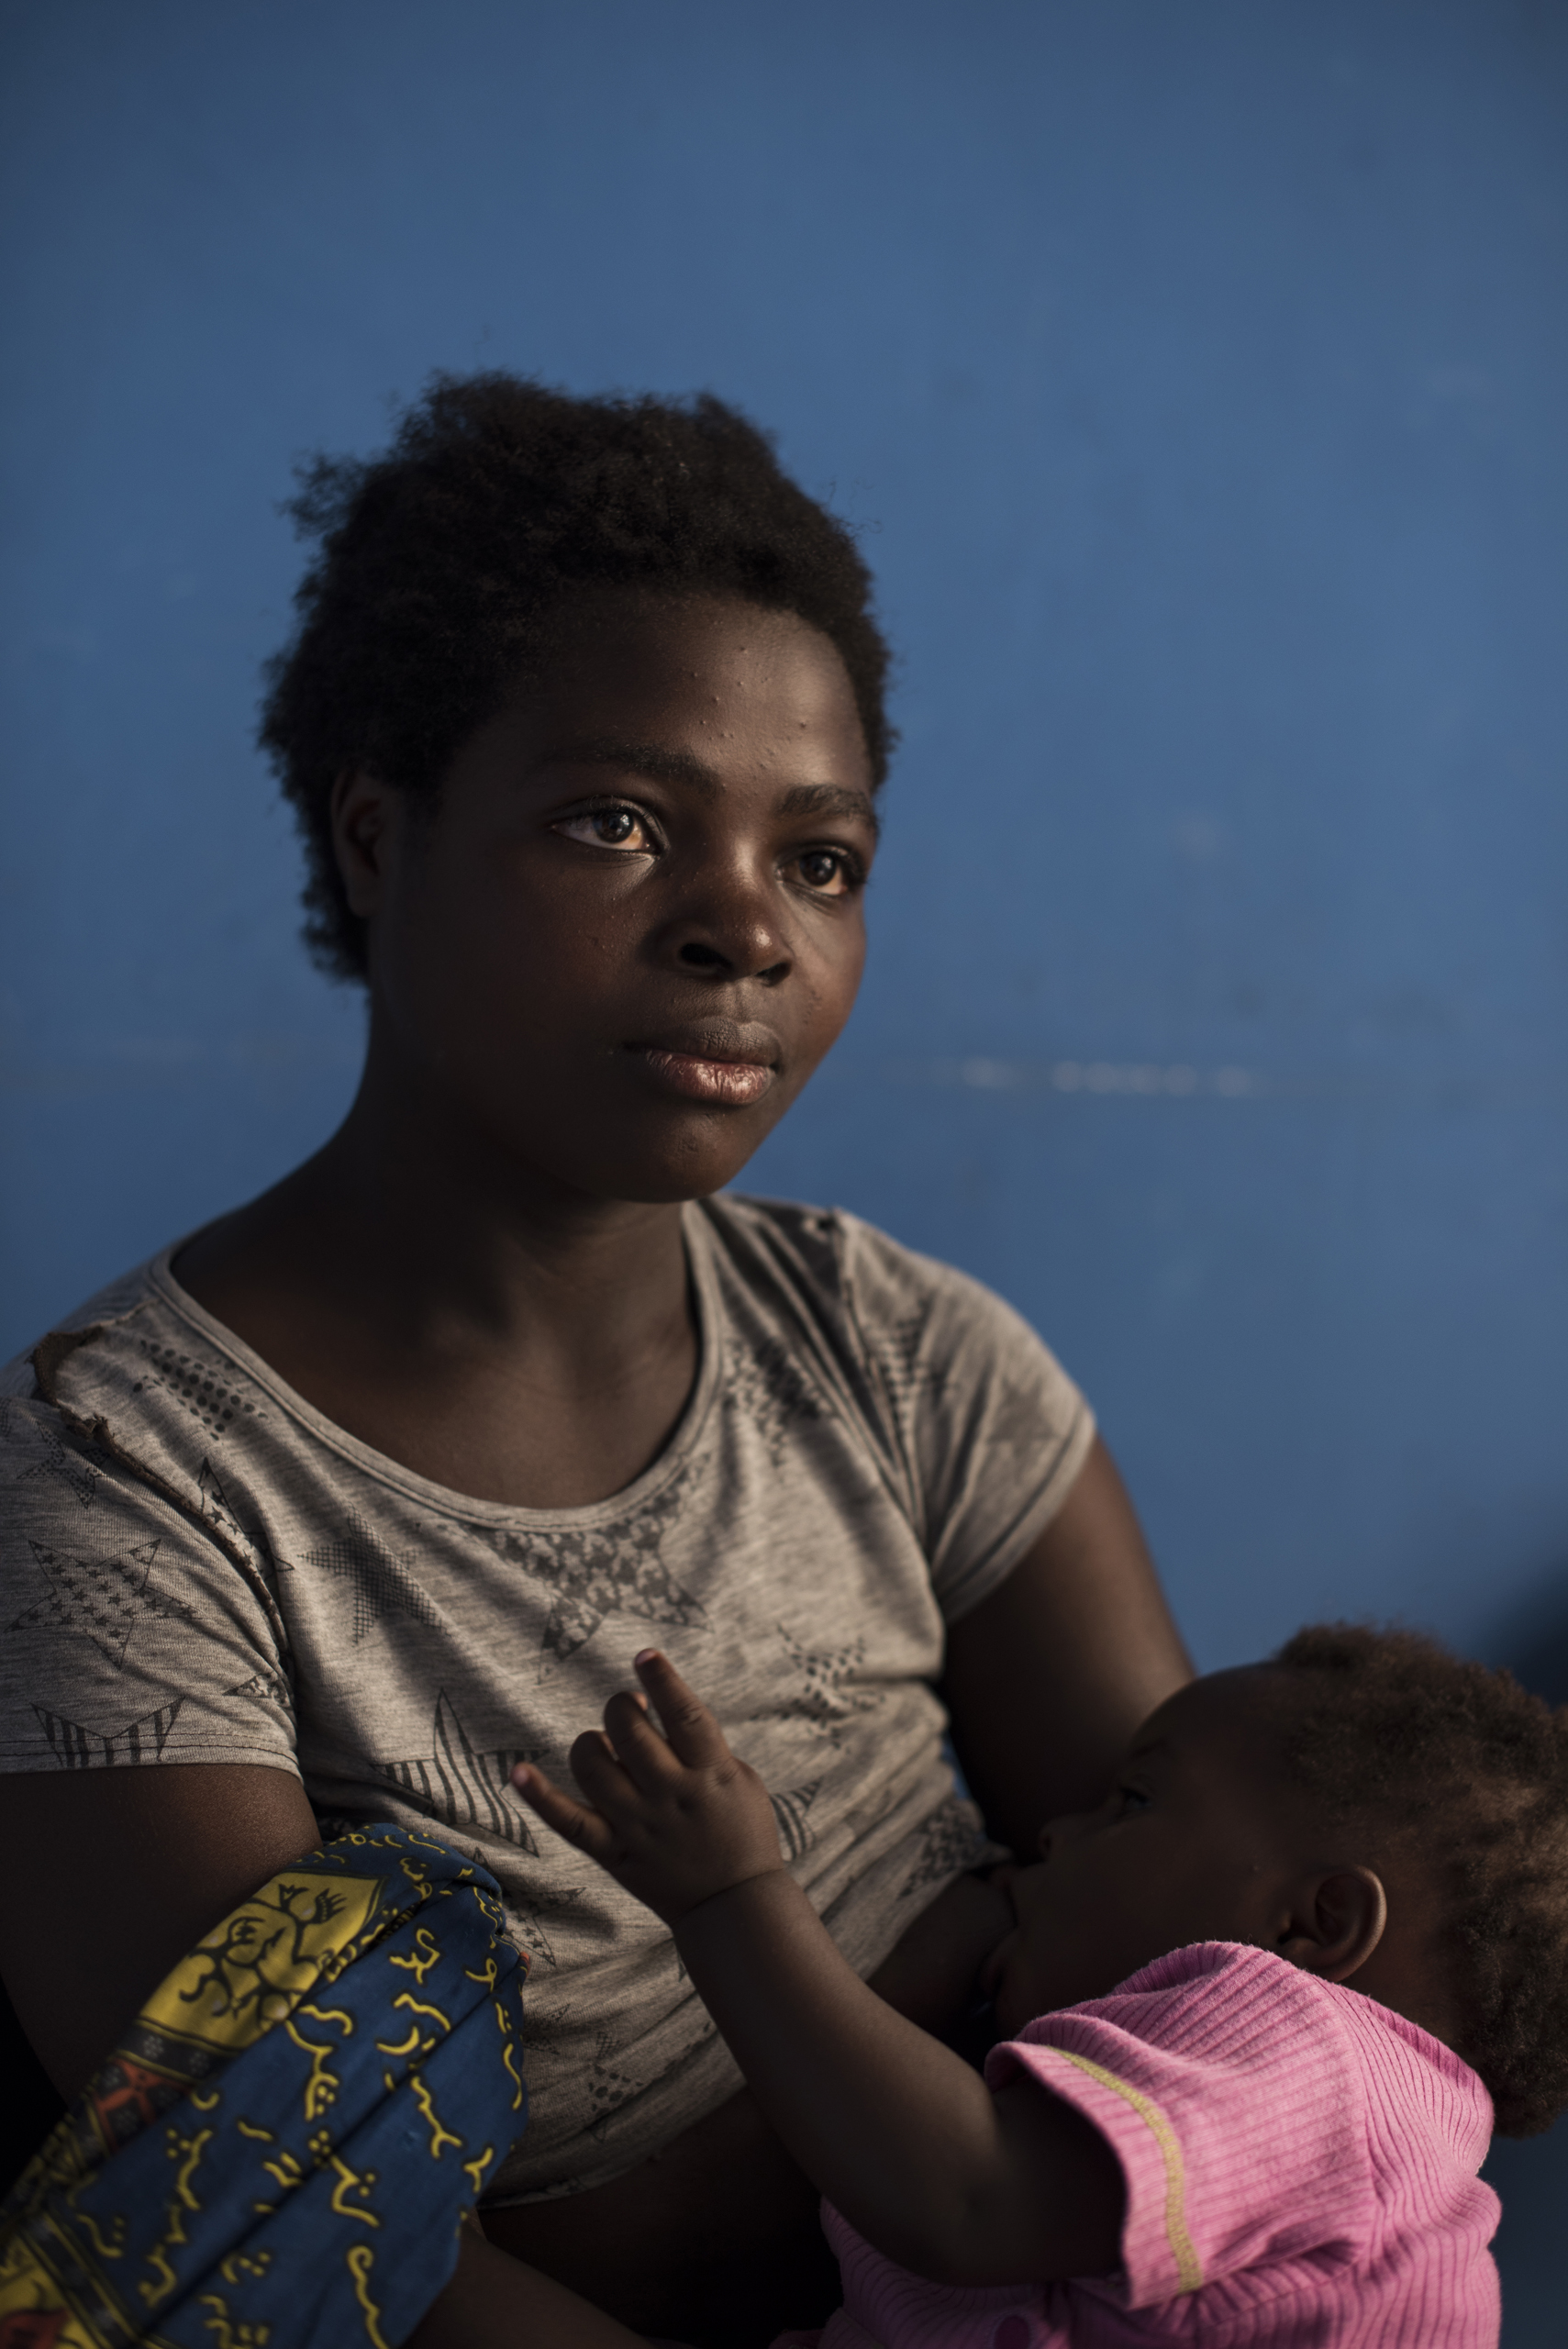 Riziki Helene Bazungo, 15, holds her 10 month old daughter, Sara Bazungo, who was born out of rape, Goma, Democratic Republic of Congo, Dec. 4, 2015.